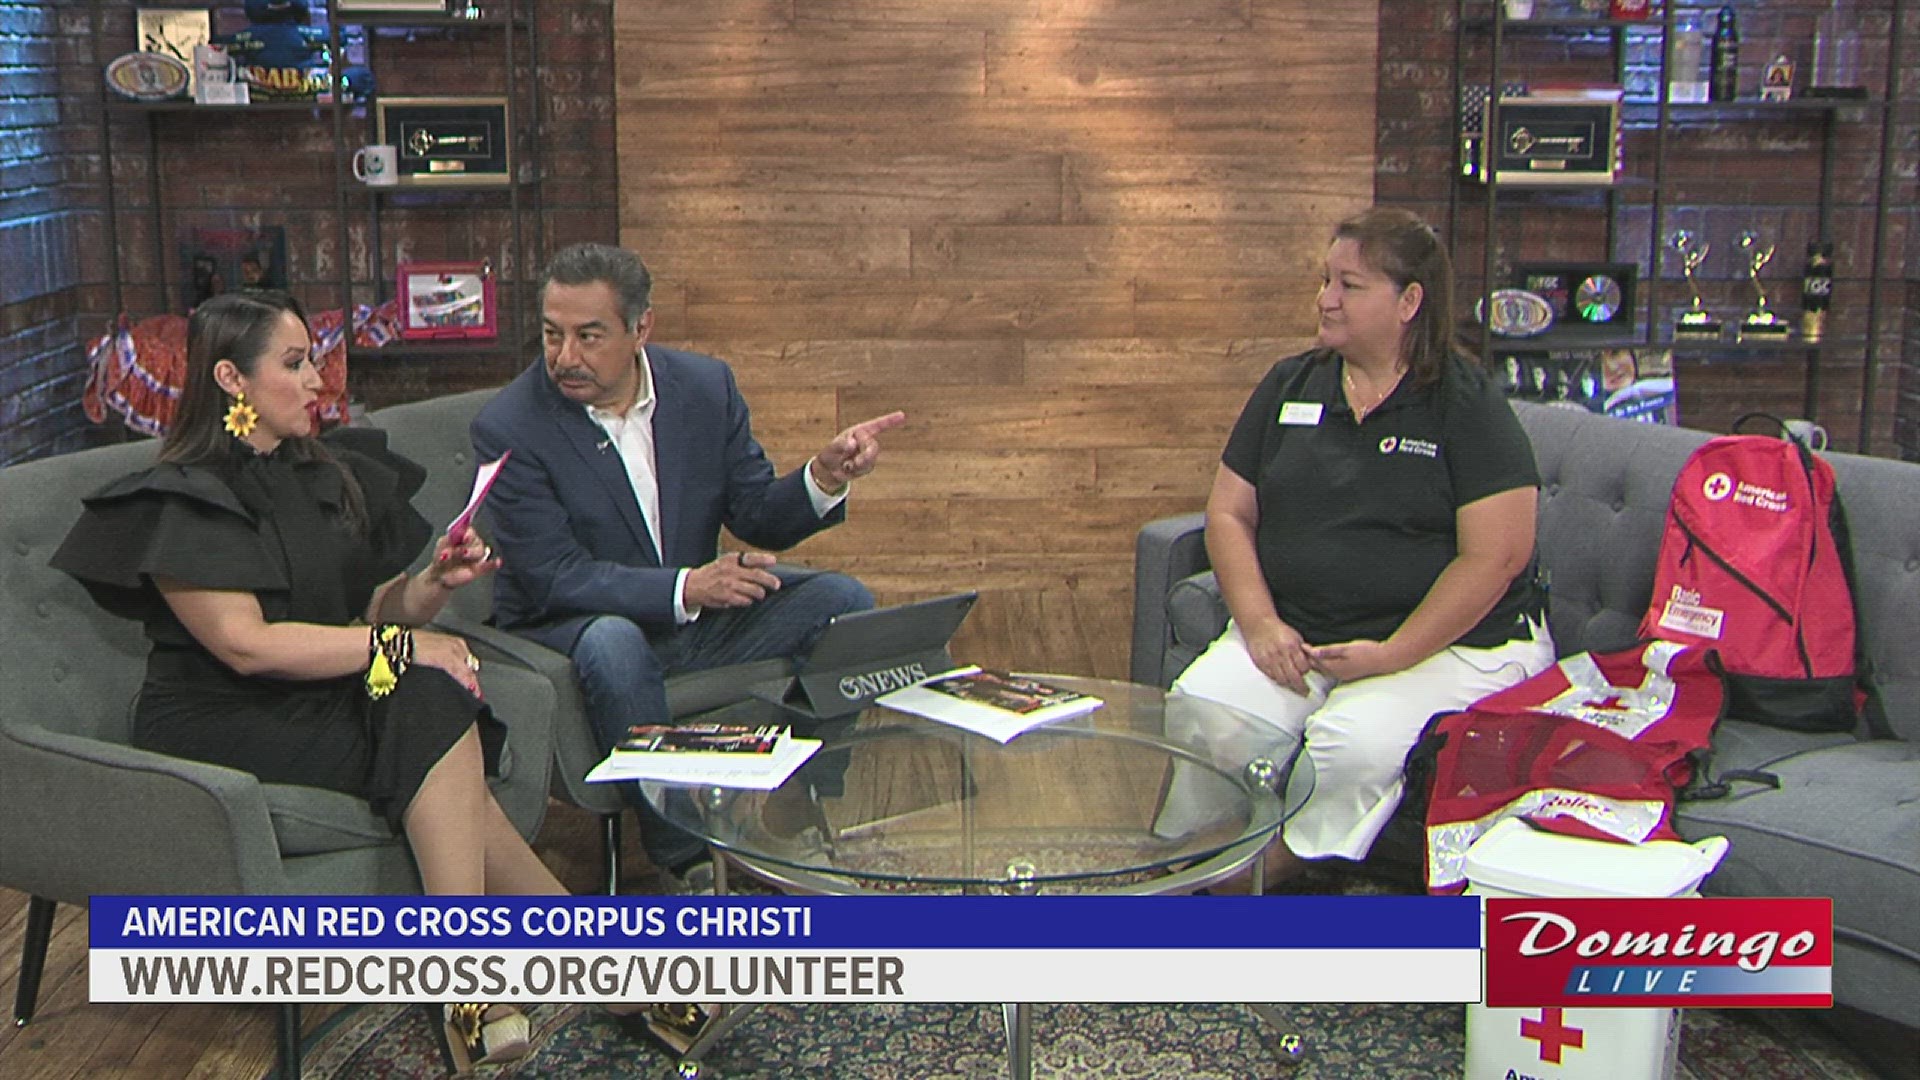 The American Red Cross of Corpus Christi joined us on Domingo Live to call for bilingual volunteers within the Coastal Bend.